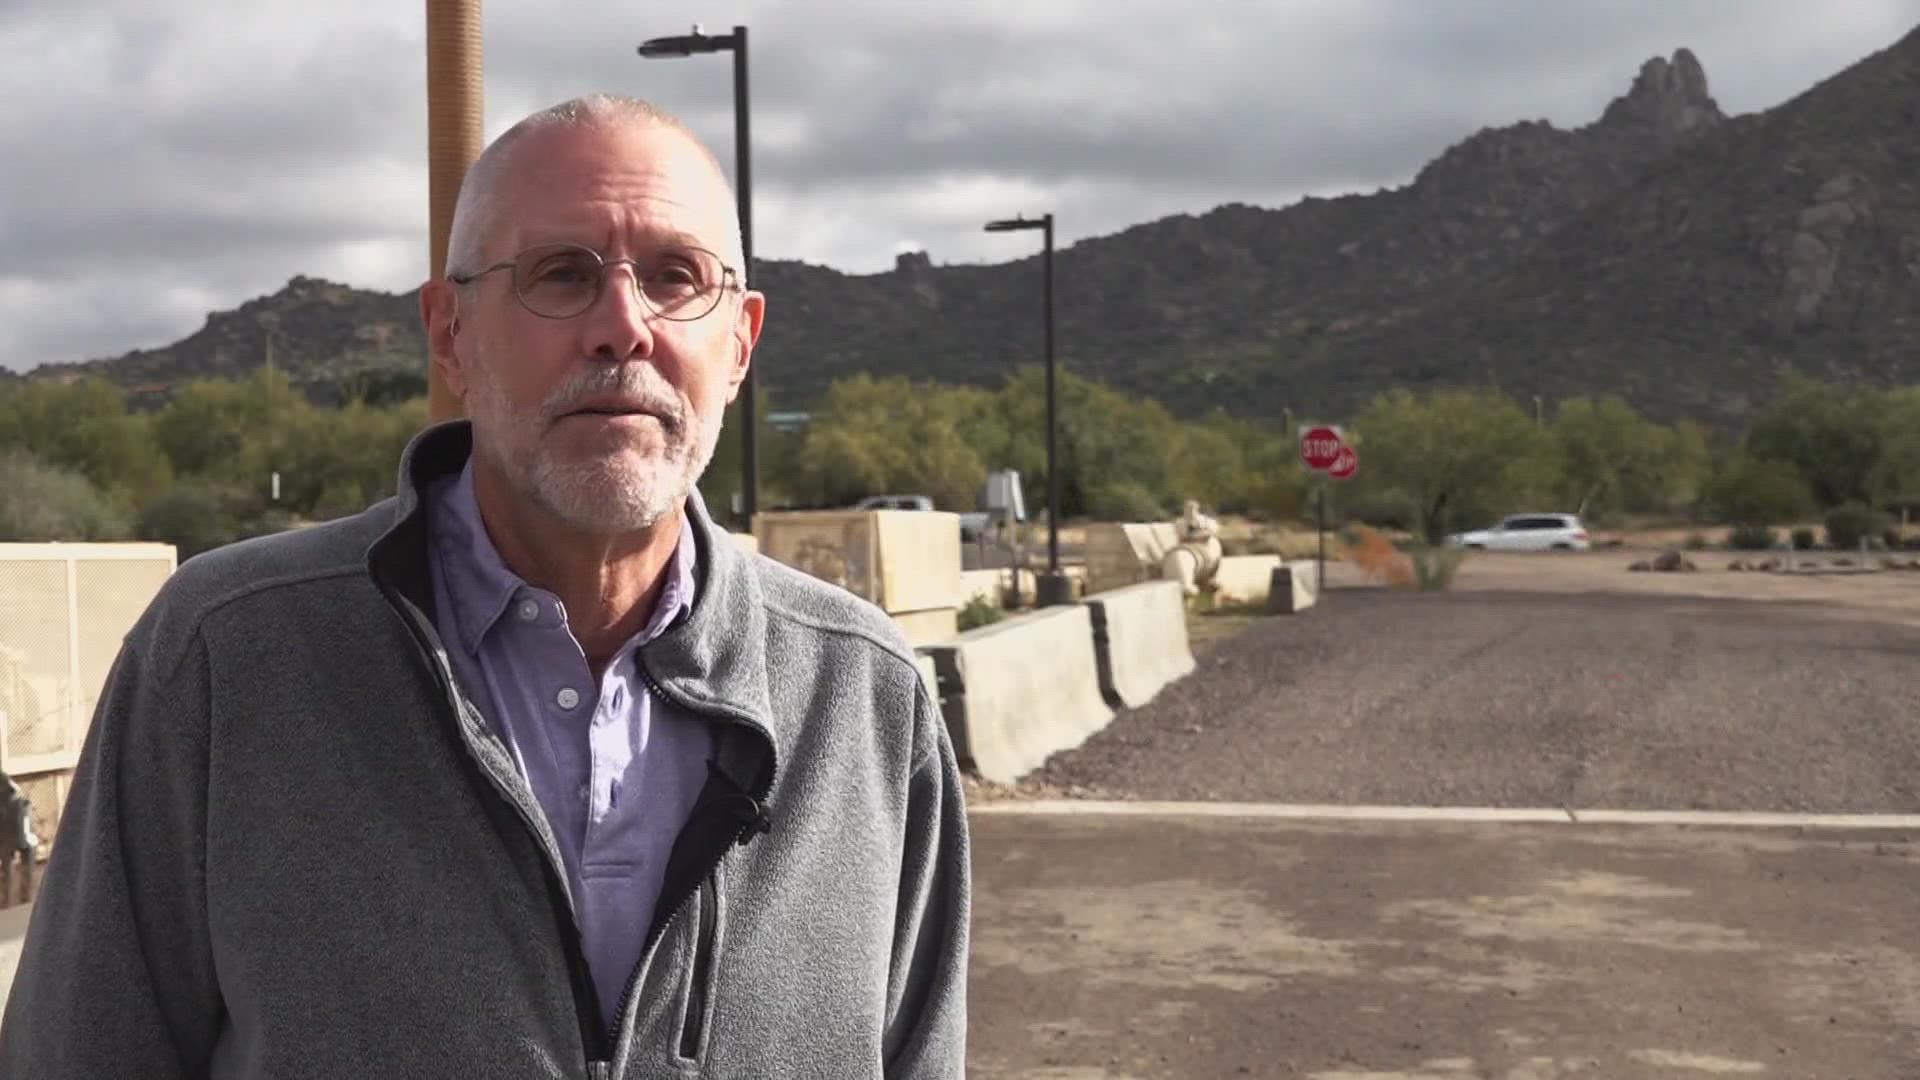 About 500 homes in Rio Verde Foothills have been cut off from Scottsdale's city water.